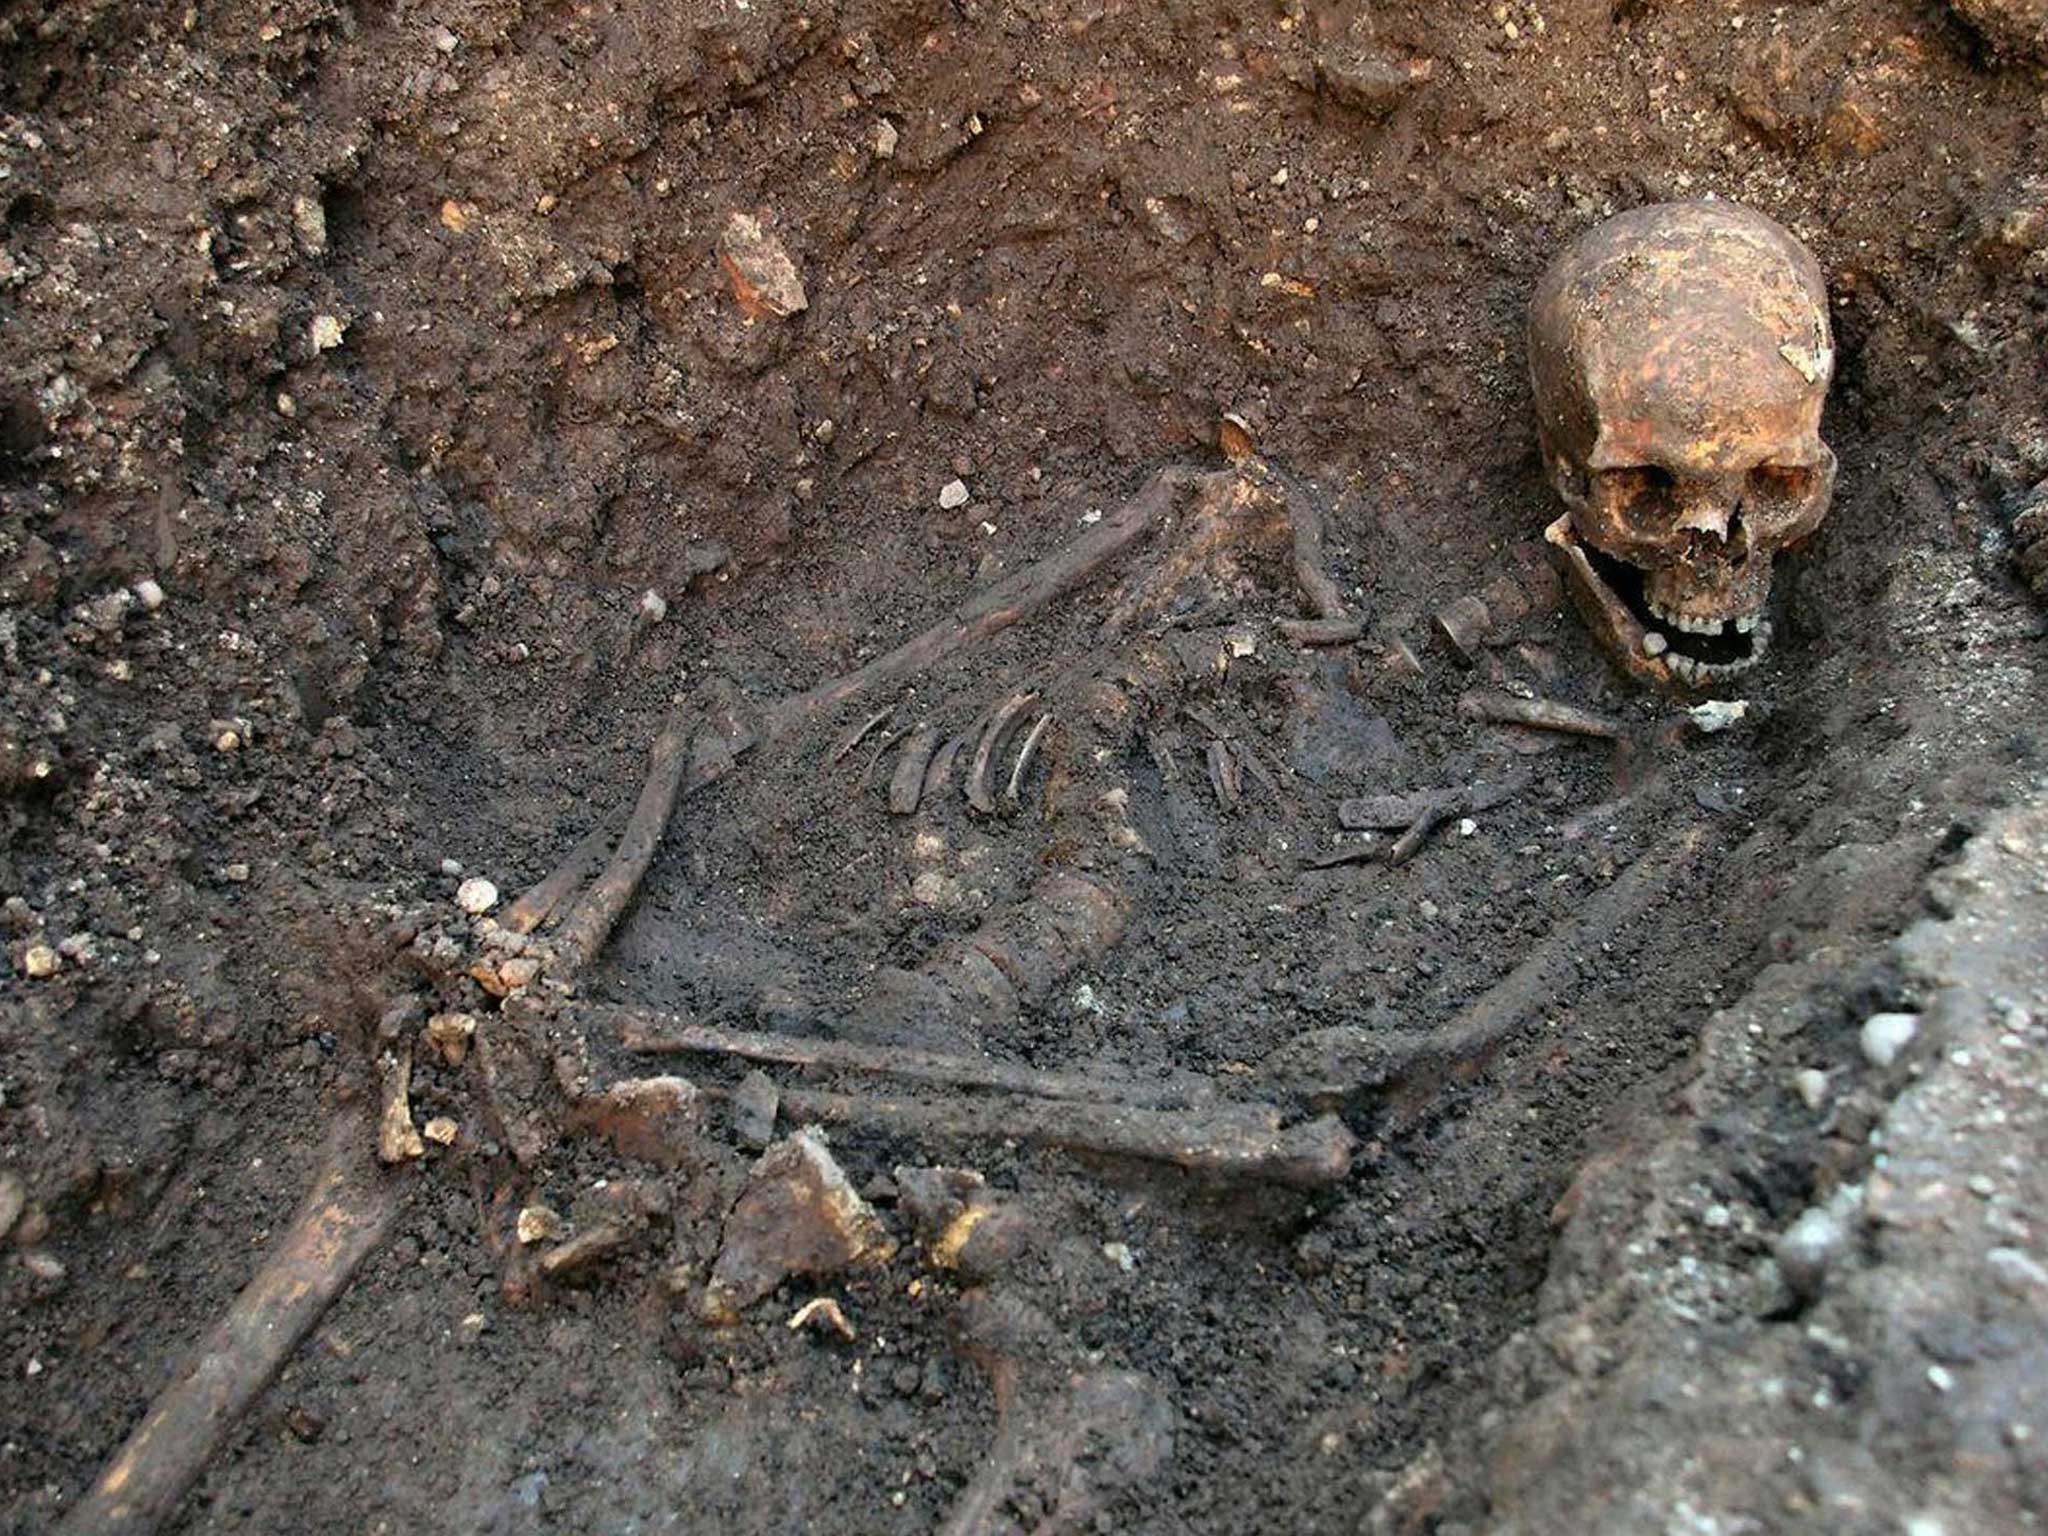 The remains of King Richard III were found in a hastily dug, untidy grave, researchers have revealed